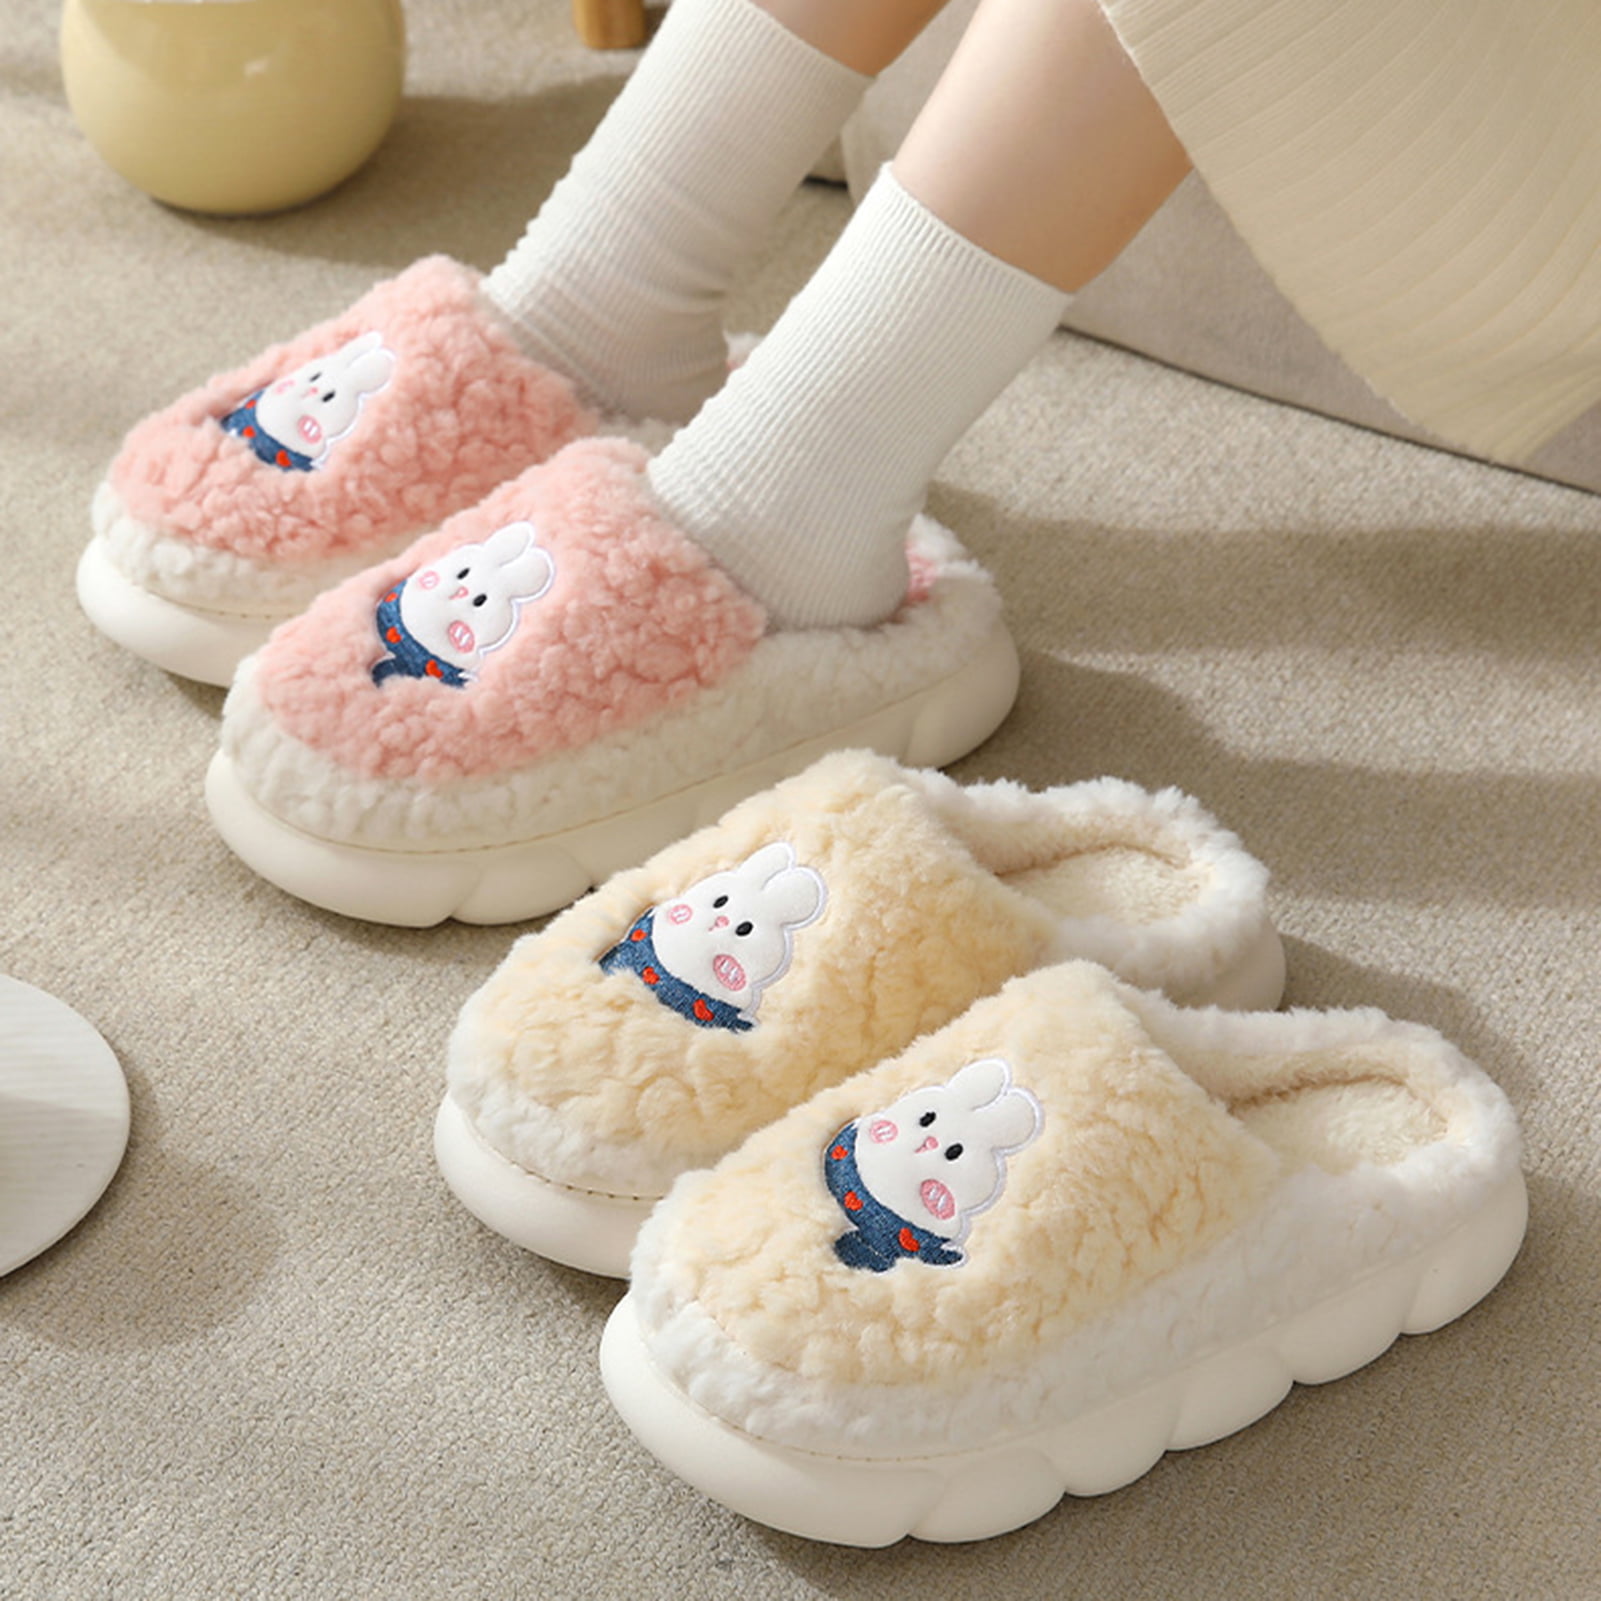 Warm House Slippers for Women Comfy Fleece Lined Winter Slippers with Memory Foam and Indoor Outdoor Soles - Walmart.com